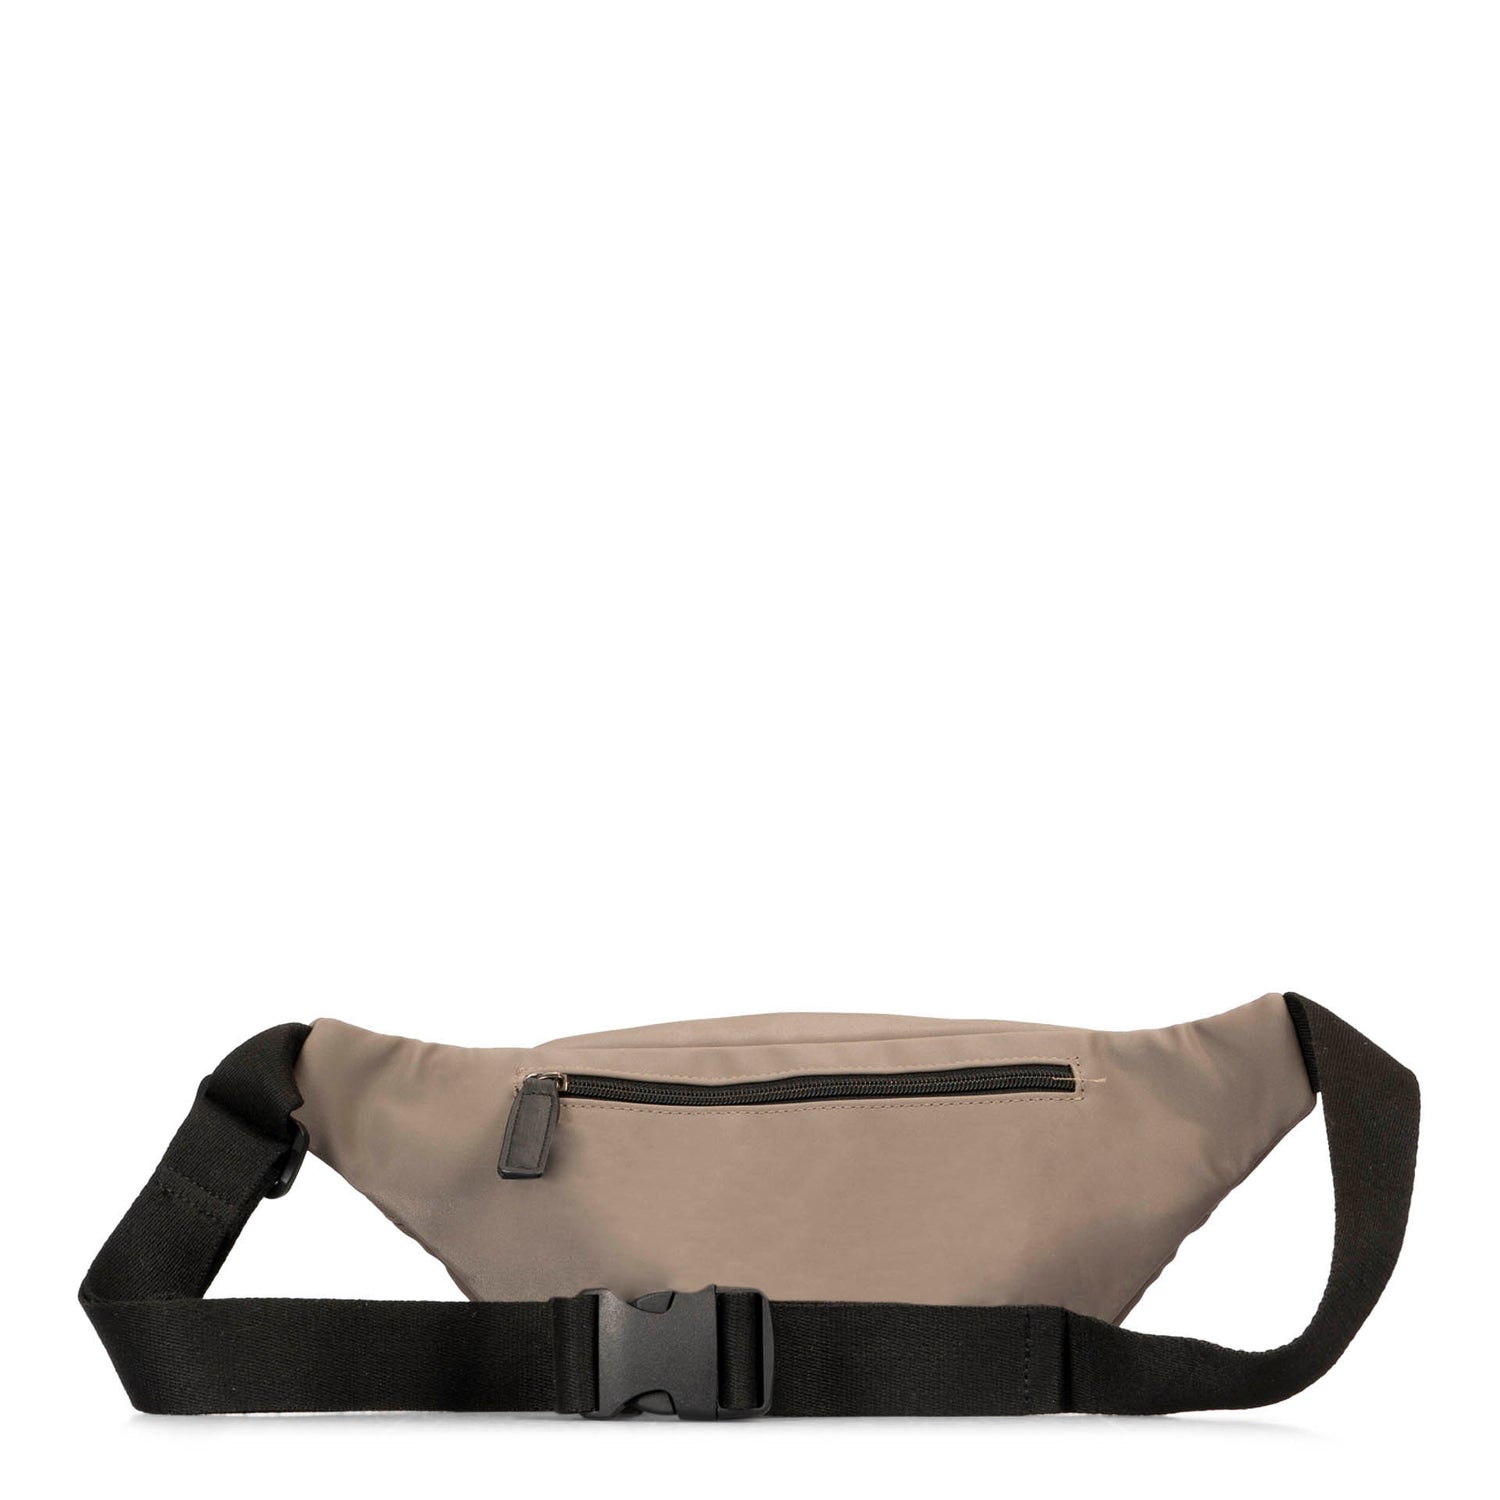 Backside view of a beige fanny pack called Dilan designed by Roots showing its two tone PU-nylon texture, a belt strap, and hidden back zipper pocket.